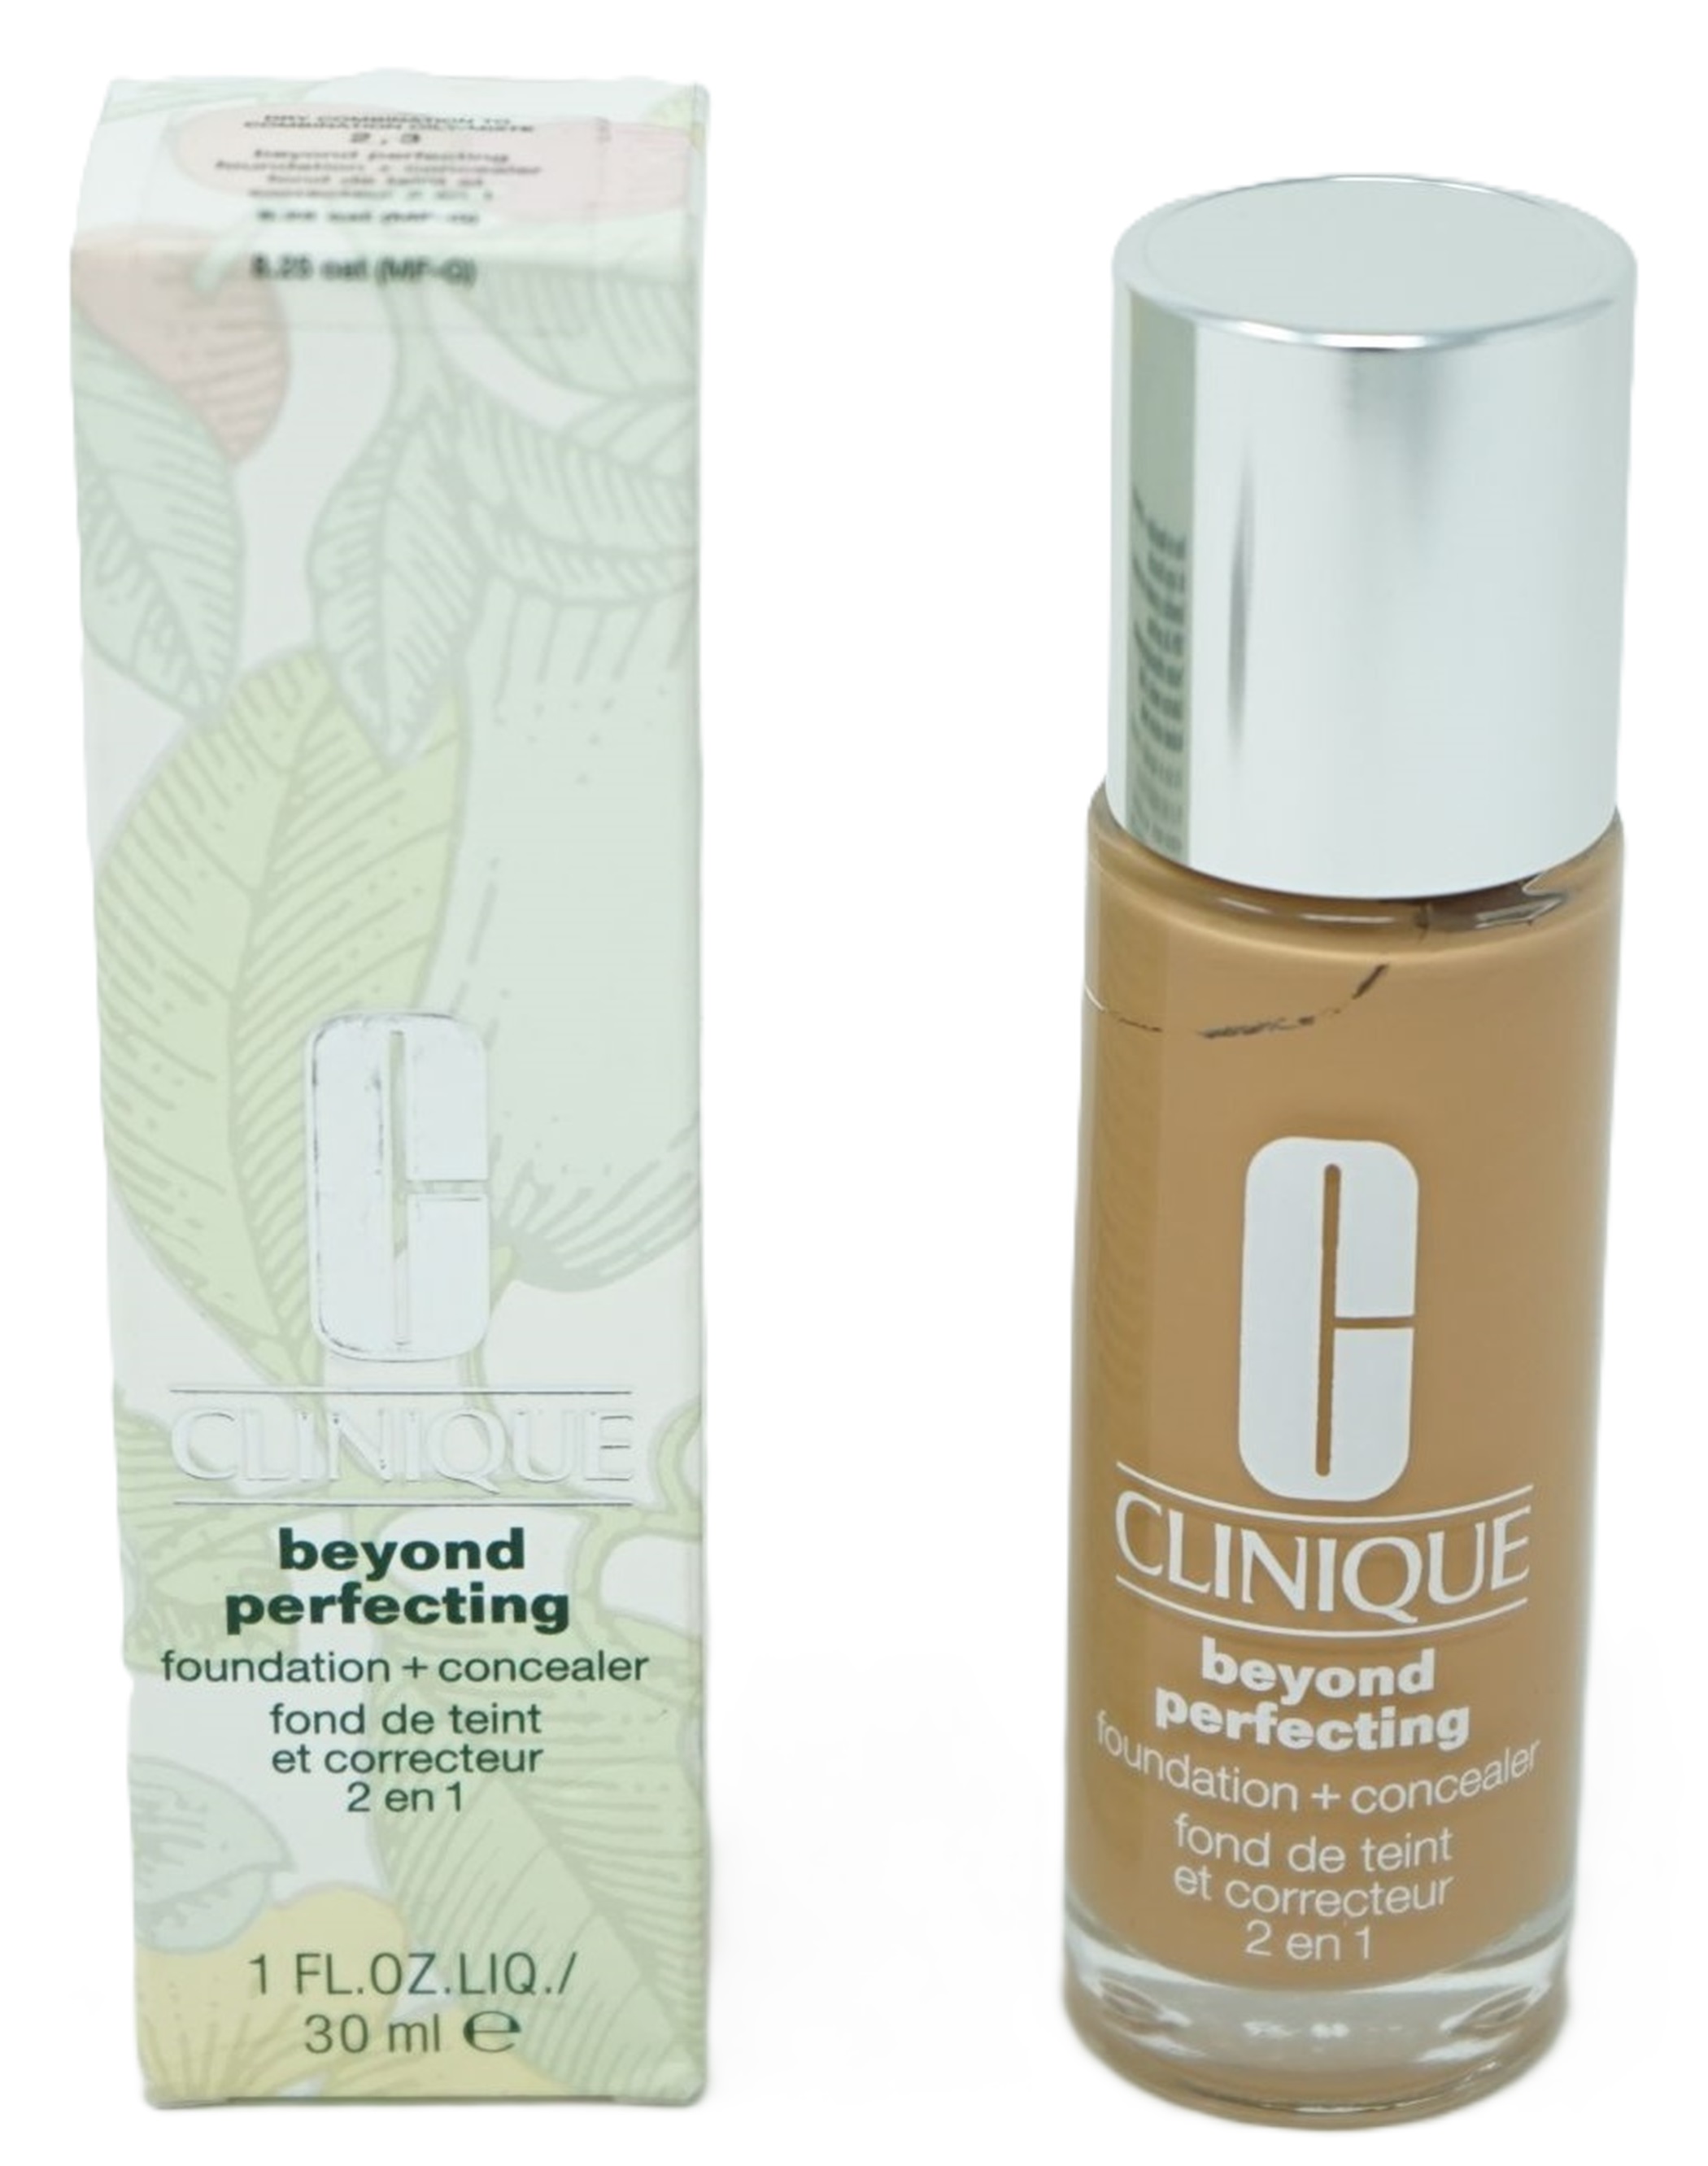 Clinique Beyond Perfecting foundation concealer 8,25 oat (MF-G)